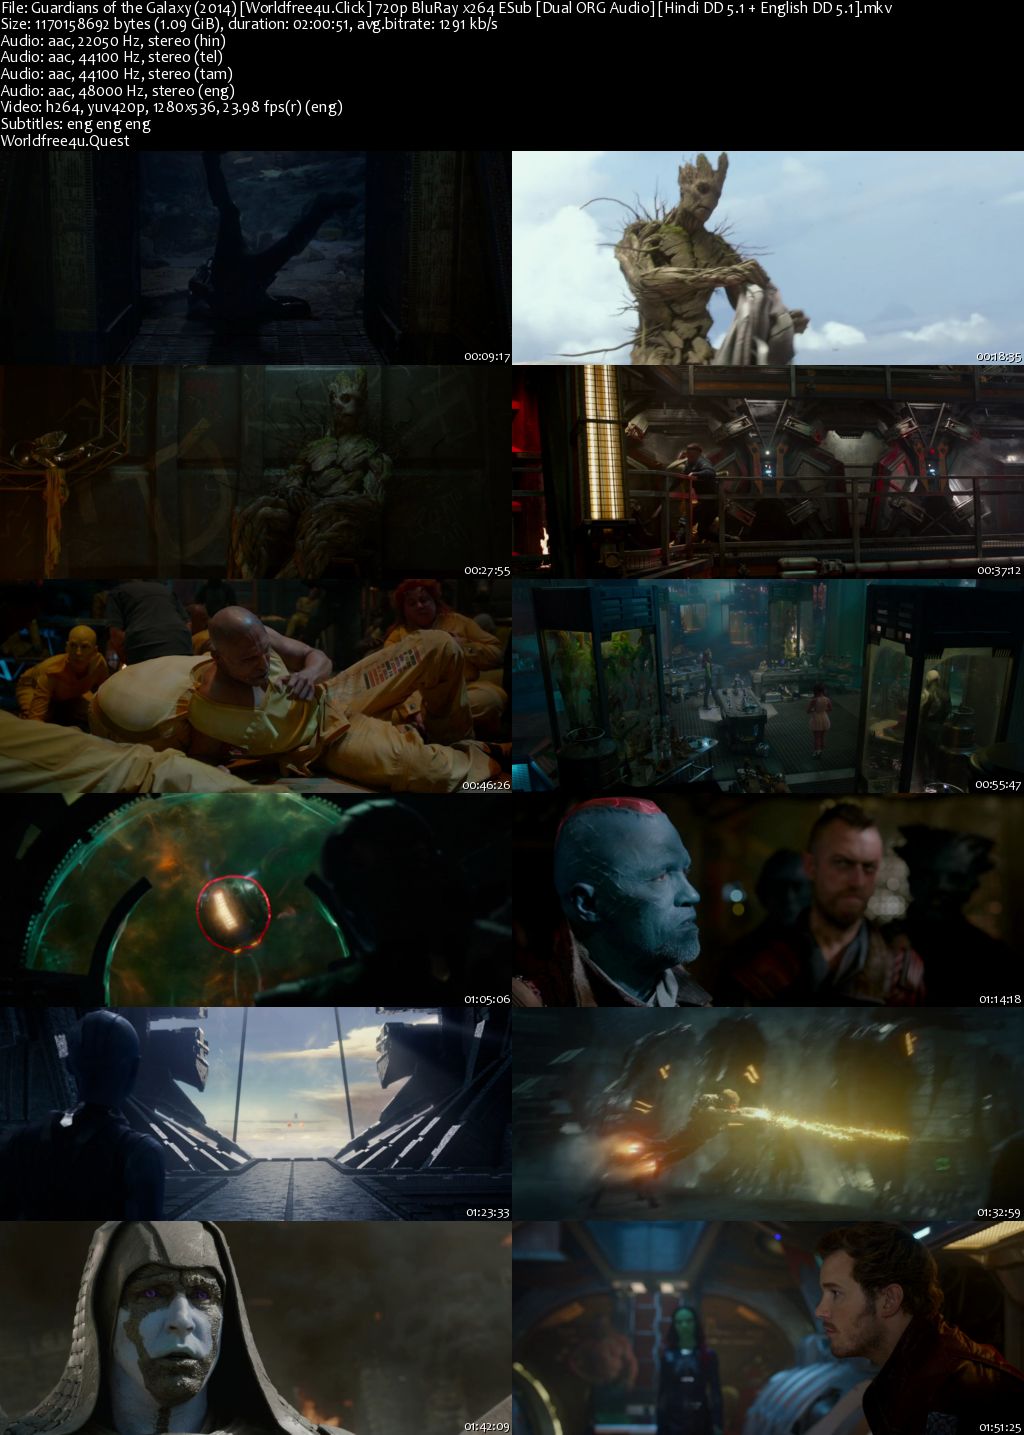 Guardians Of The Galaxy 2014 BRRip 720p Dual Audio